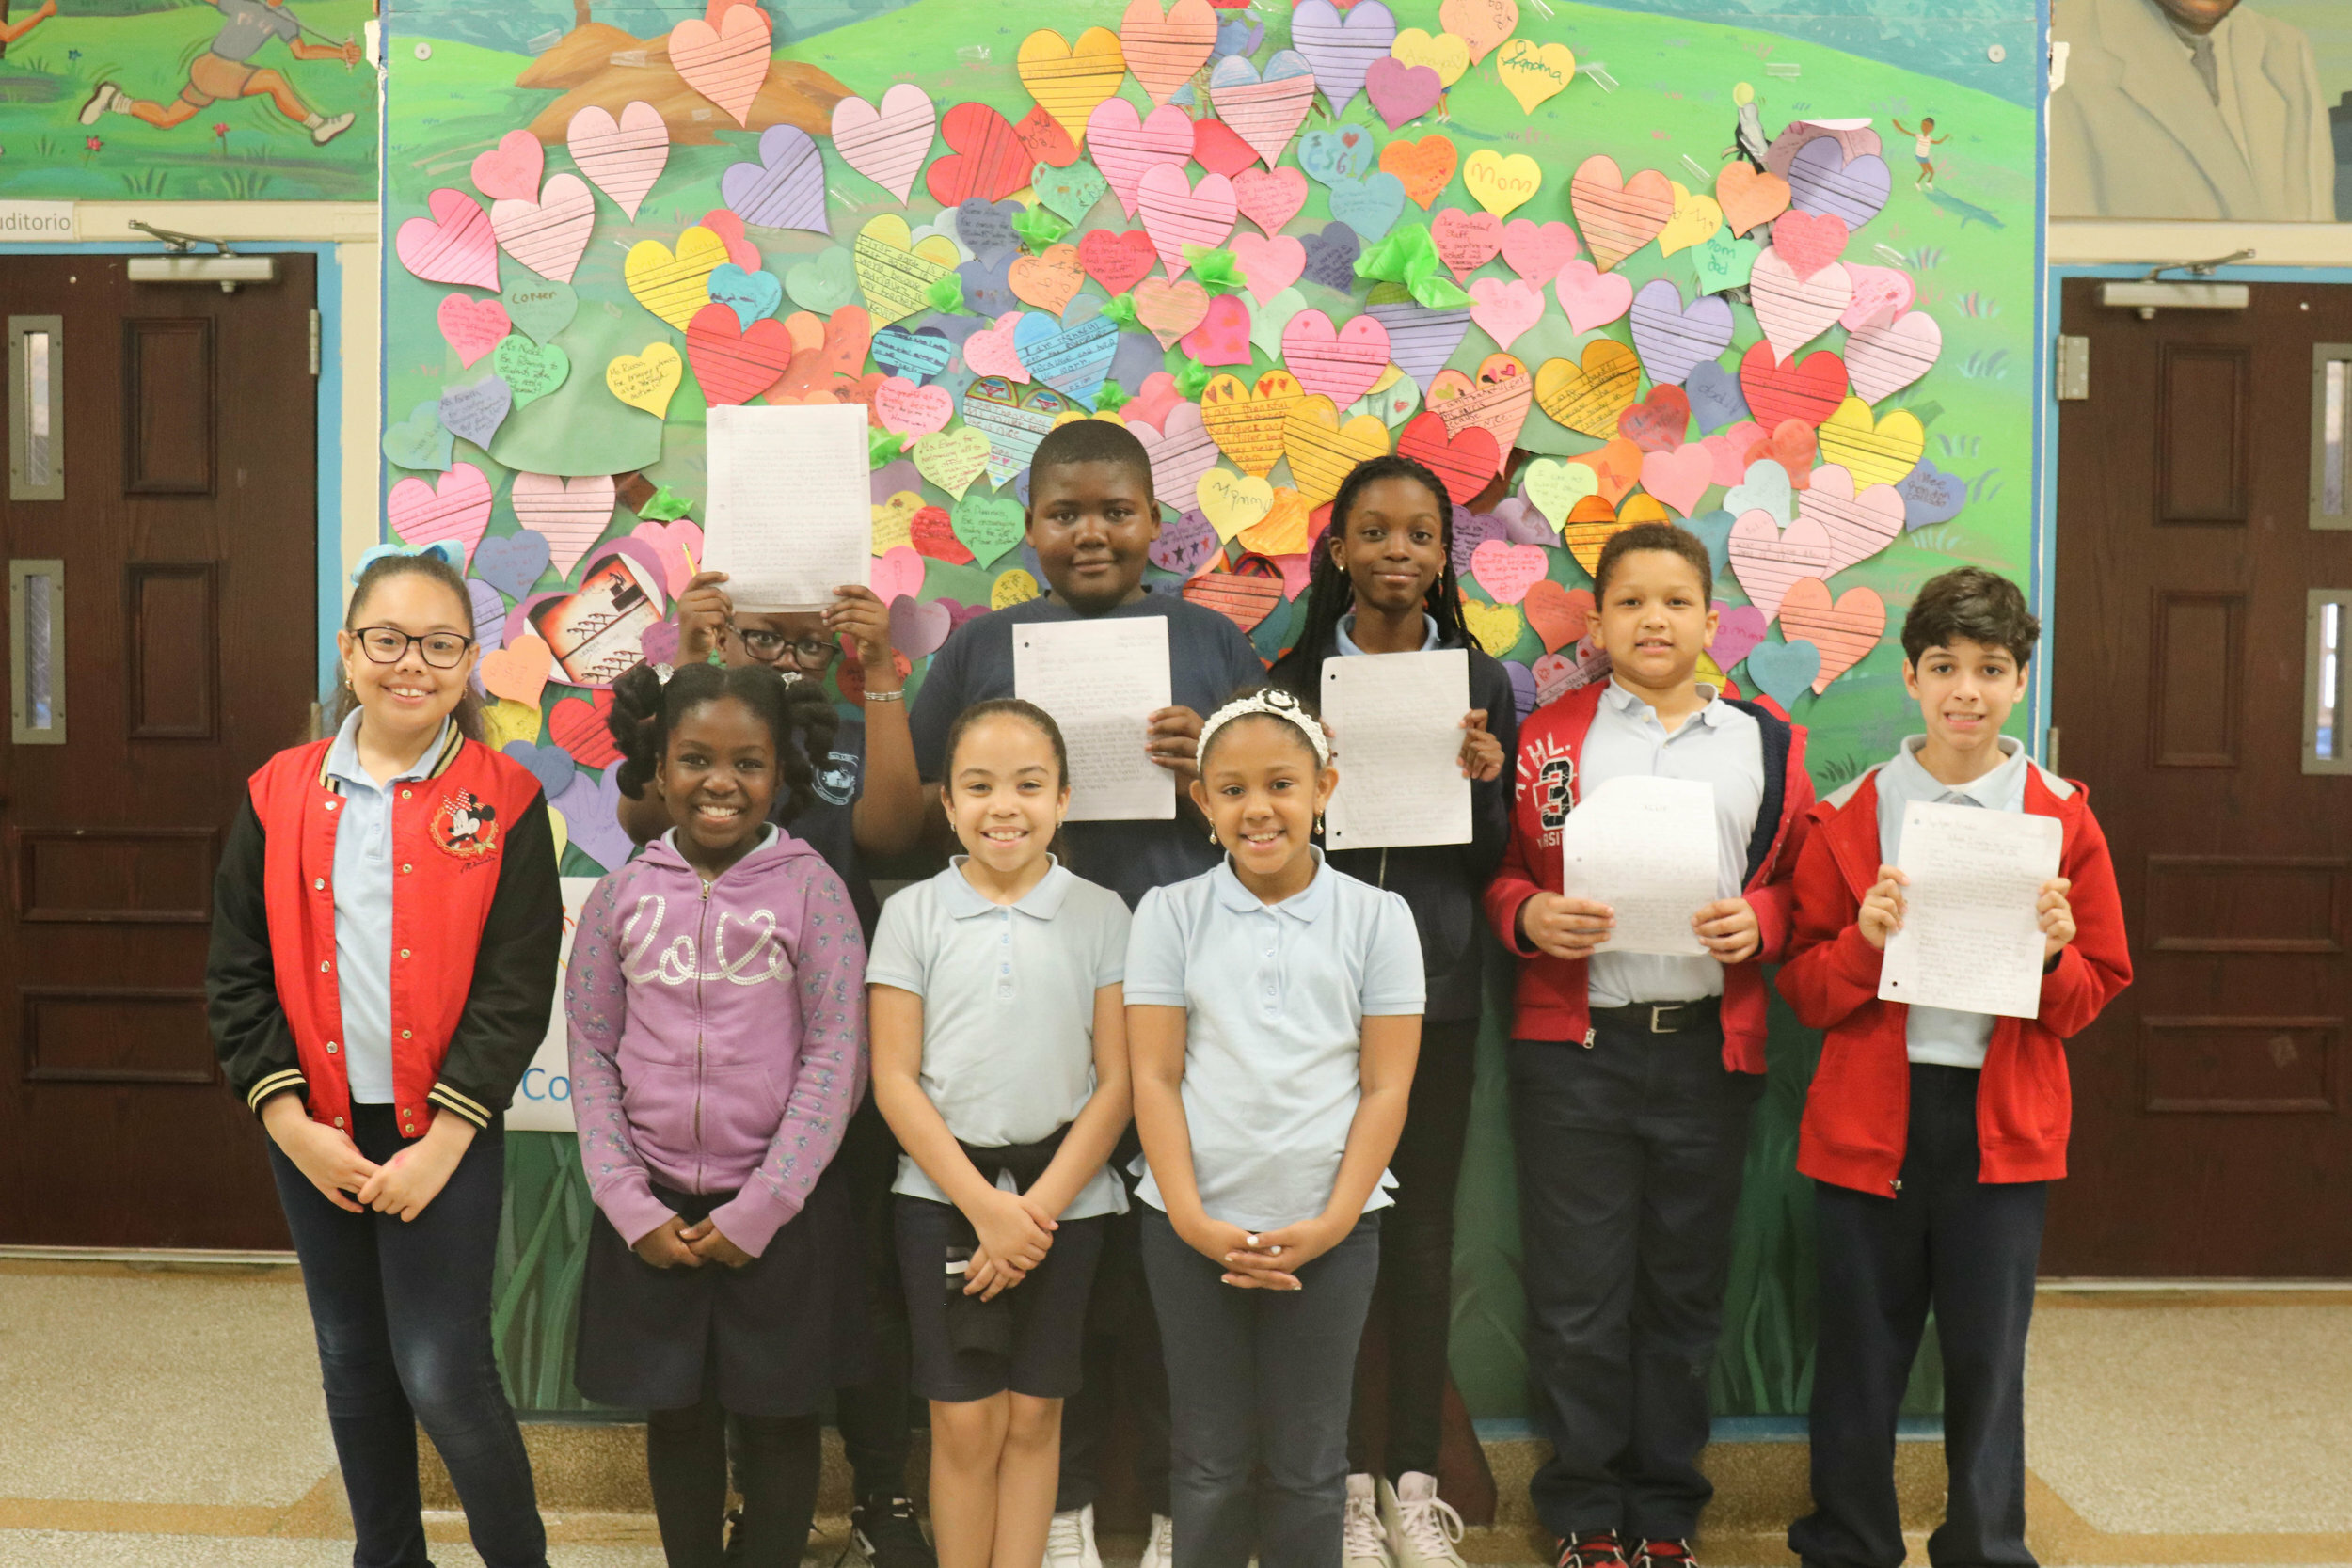 Journalists for a Day: Hear the Young Voices from Community School 61 in the Bronx